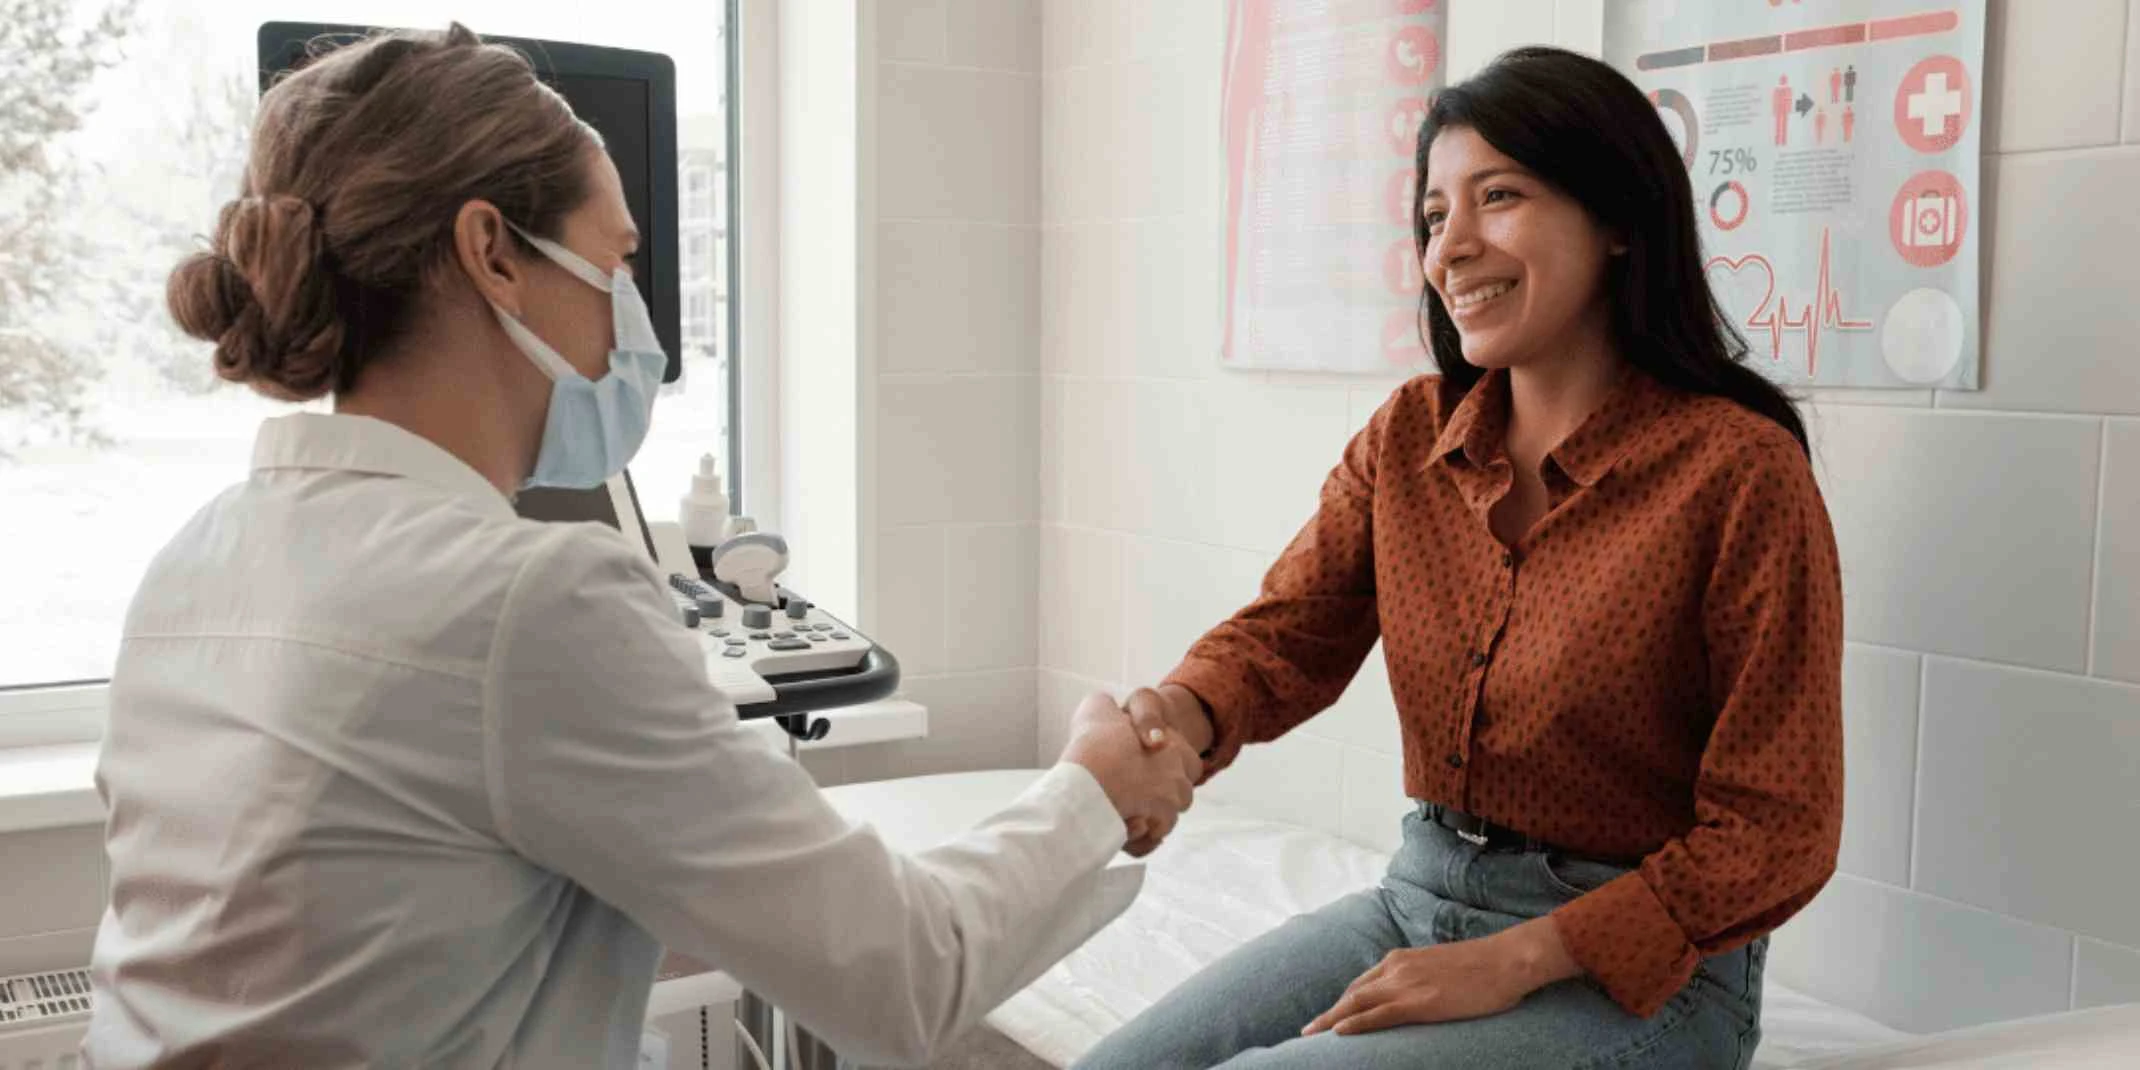 A masked white woman clinician shakes hands with her smiling female patient.